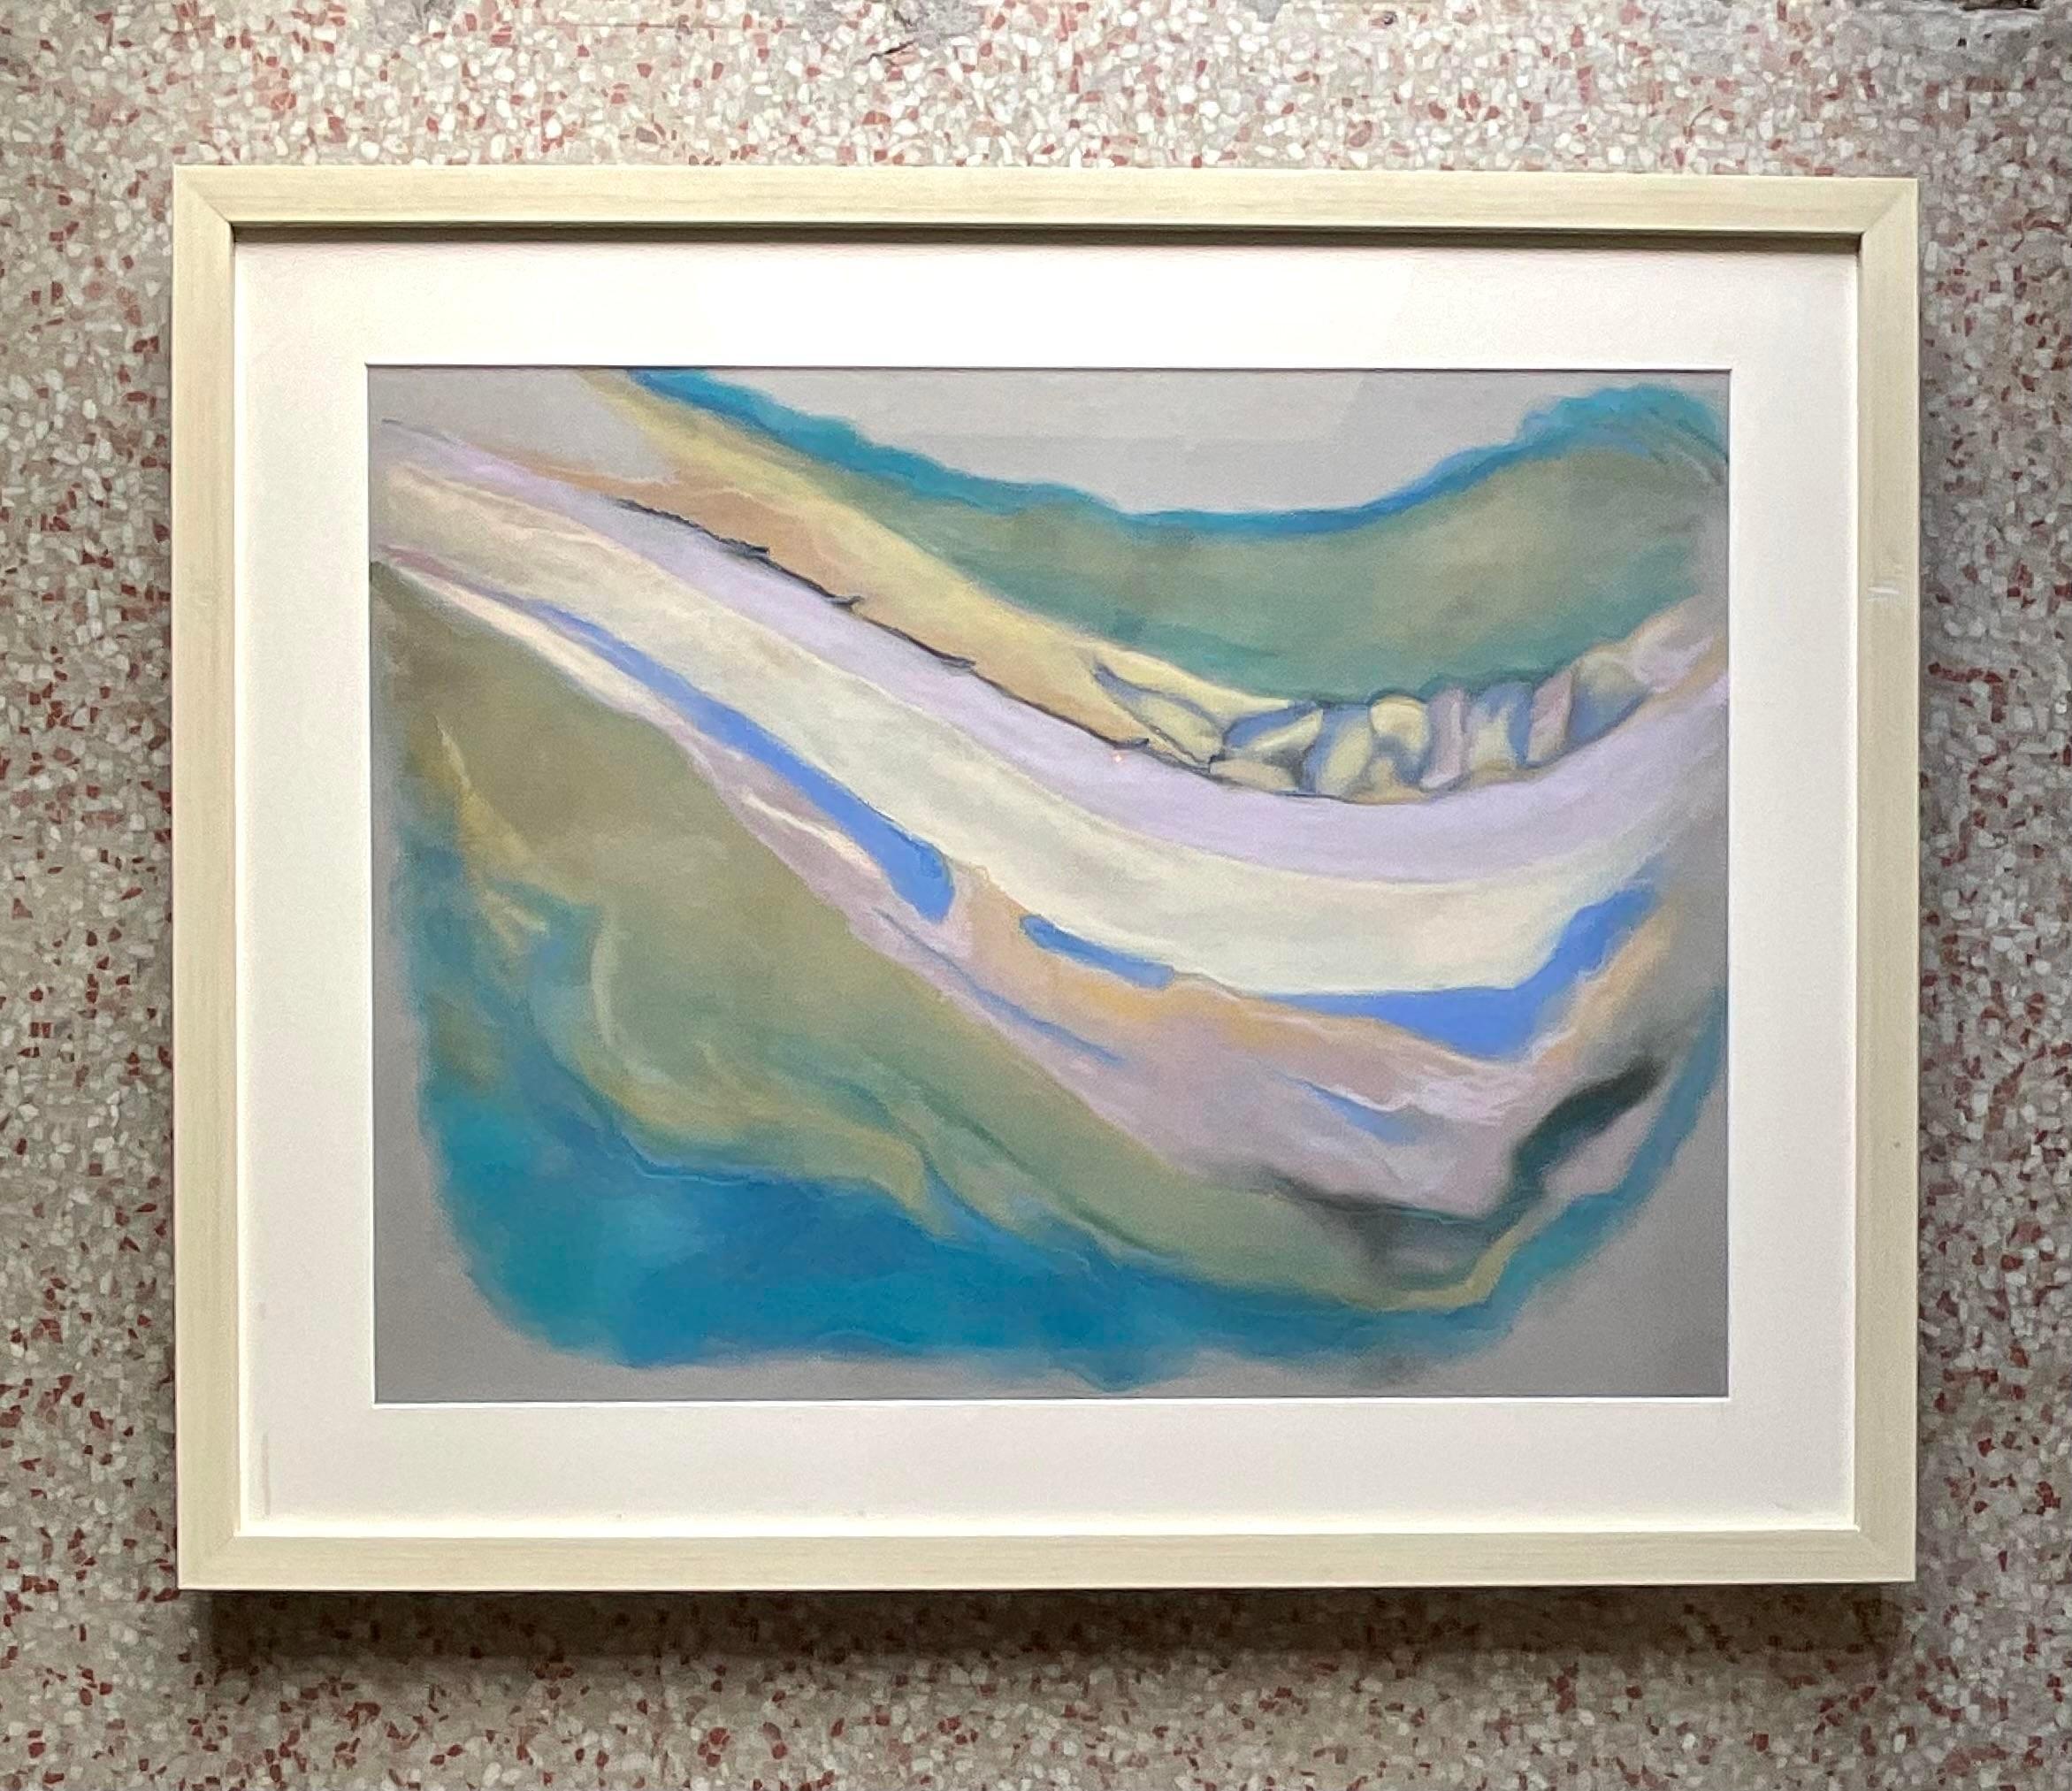 North American Vintage 1980s Signed Original Abstract Pastel on Paper Painting For Sale